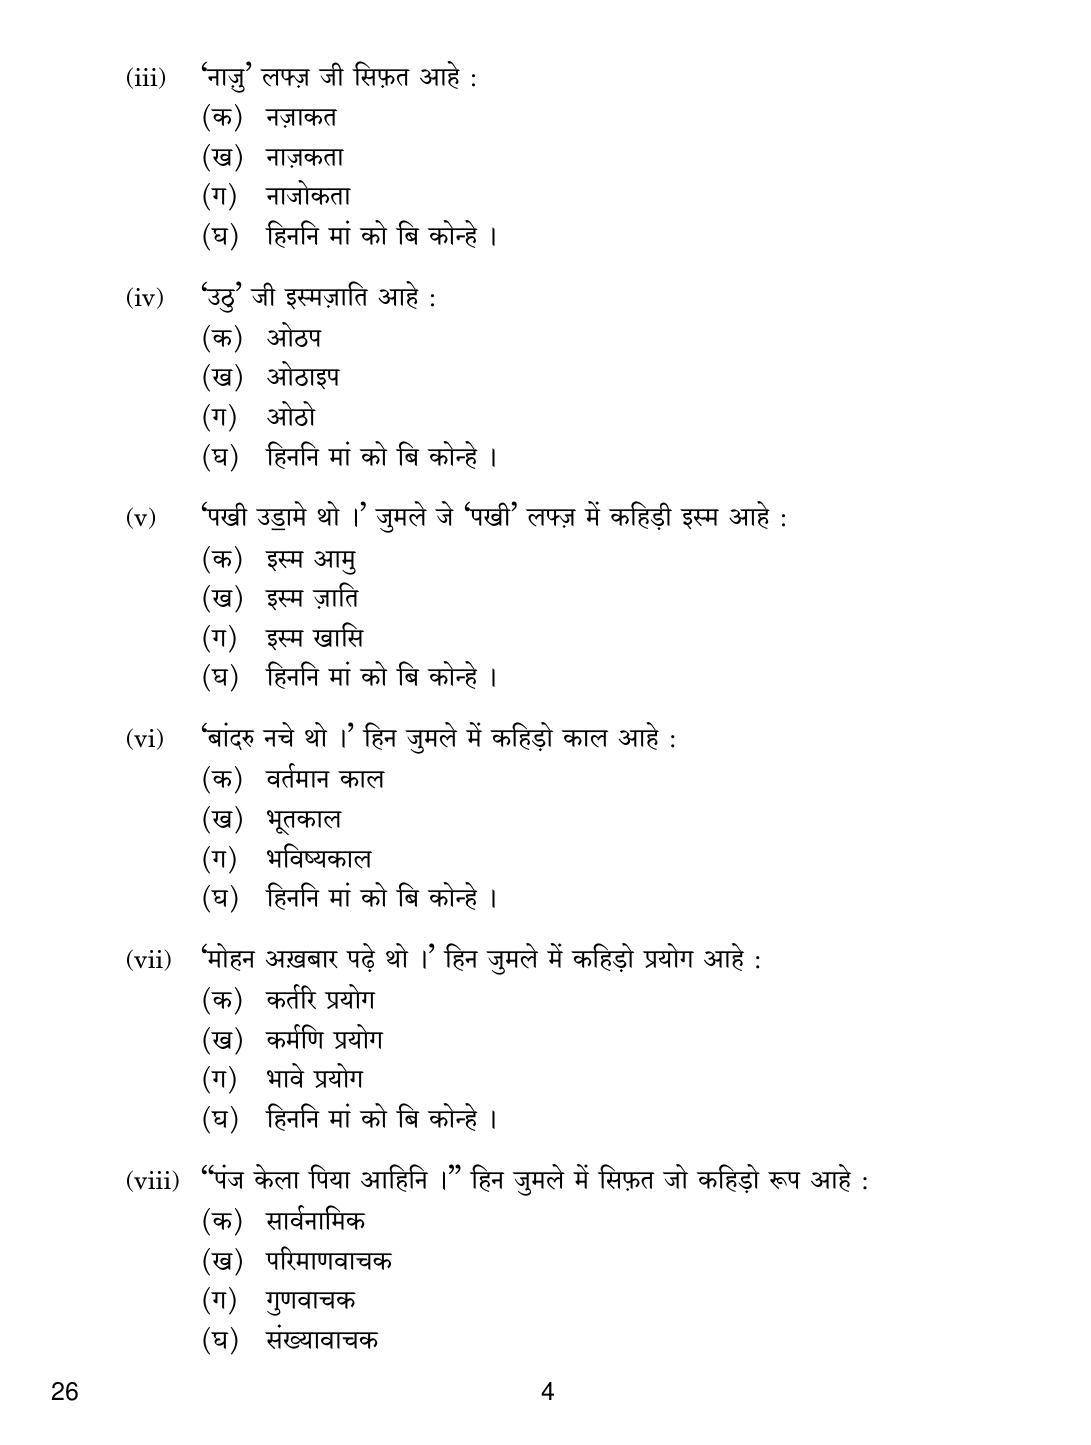 CBSE Class 10 26 SINDHI 2019 Question Paper - Page 4